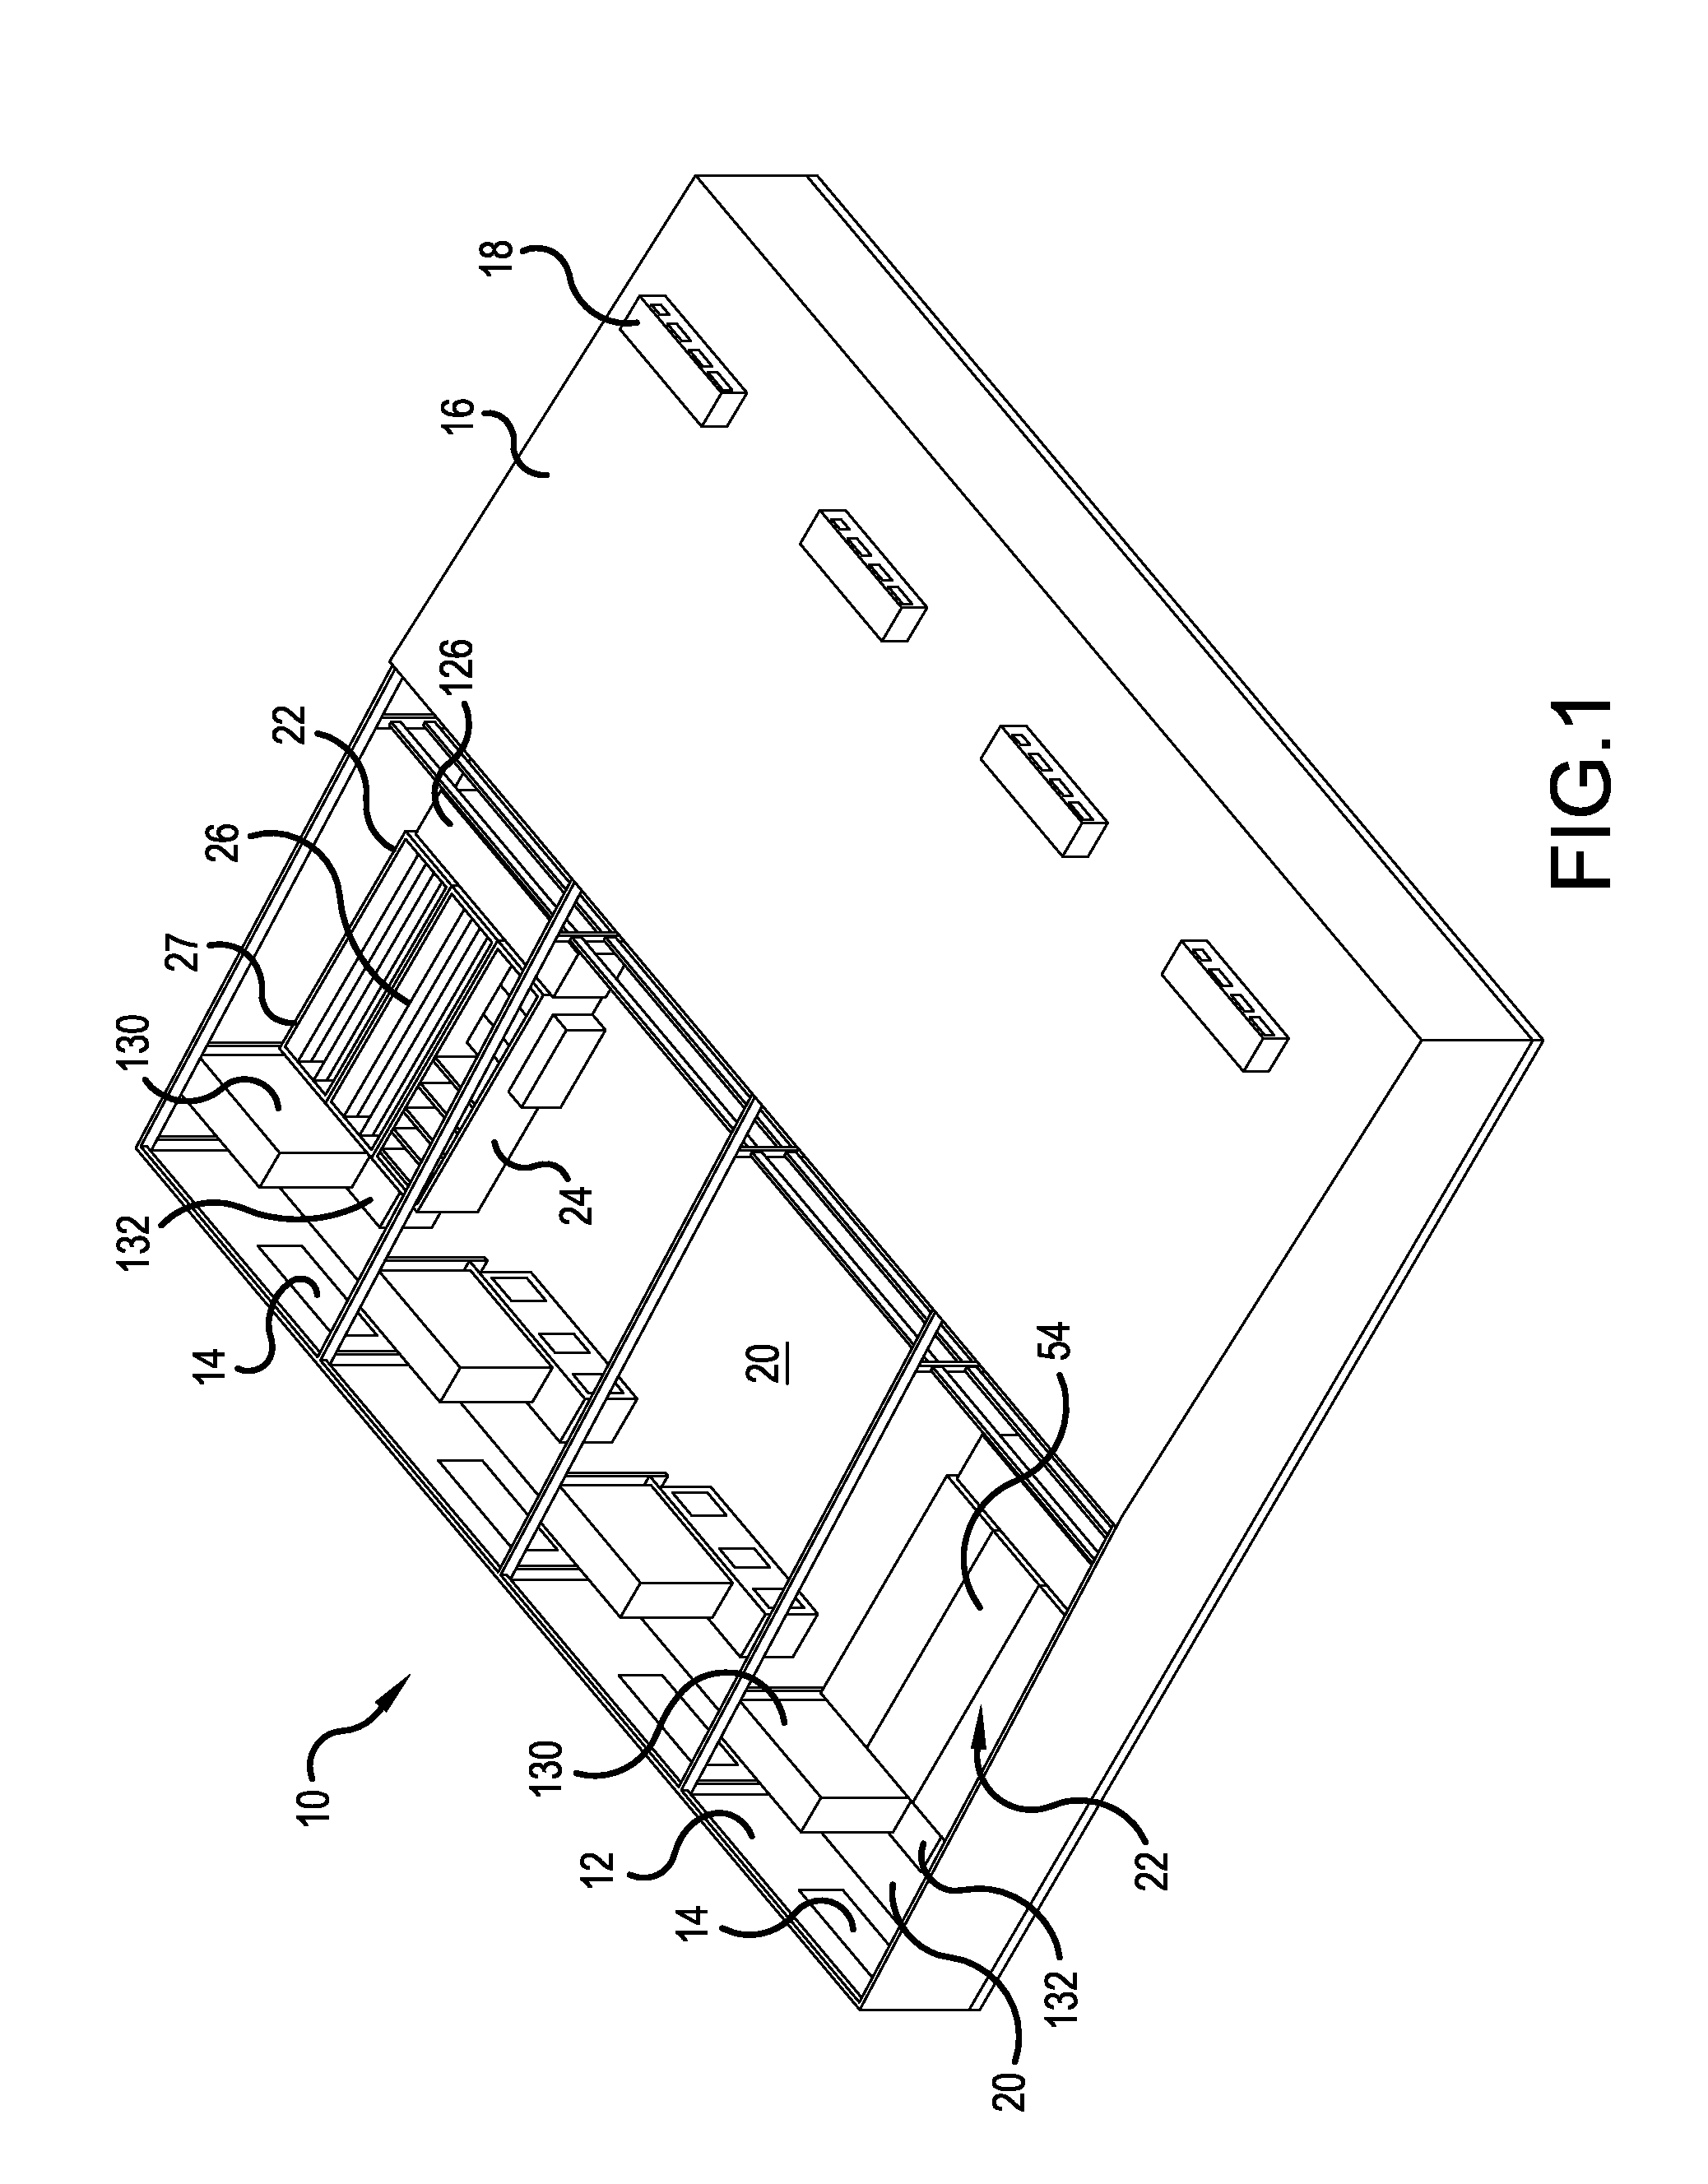 Cooling module for modular data center and system comprising the cooling module and at least one server module